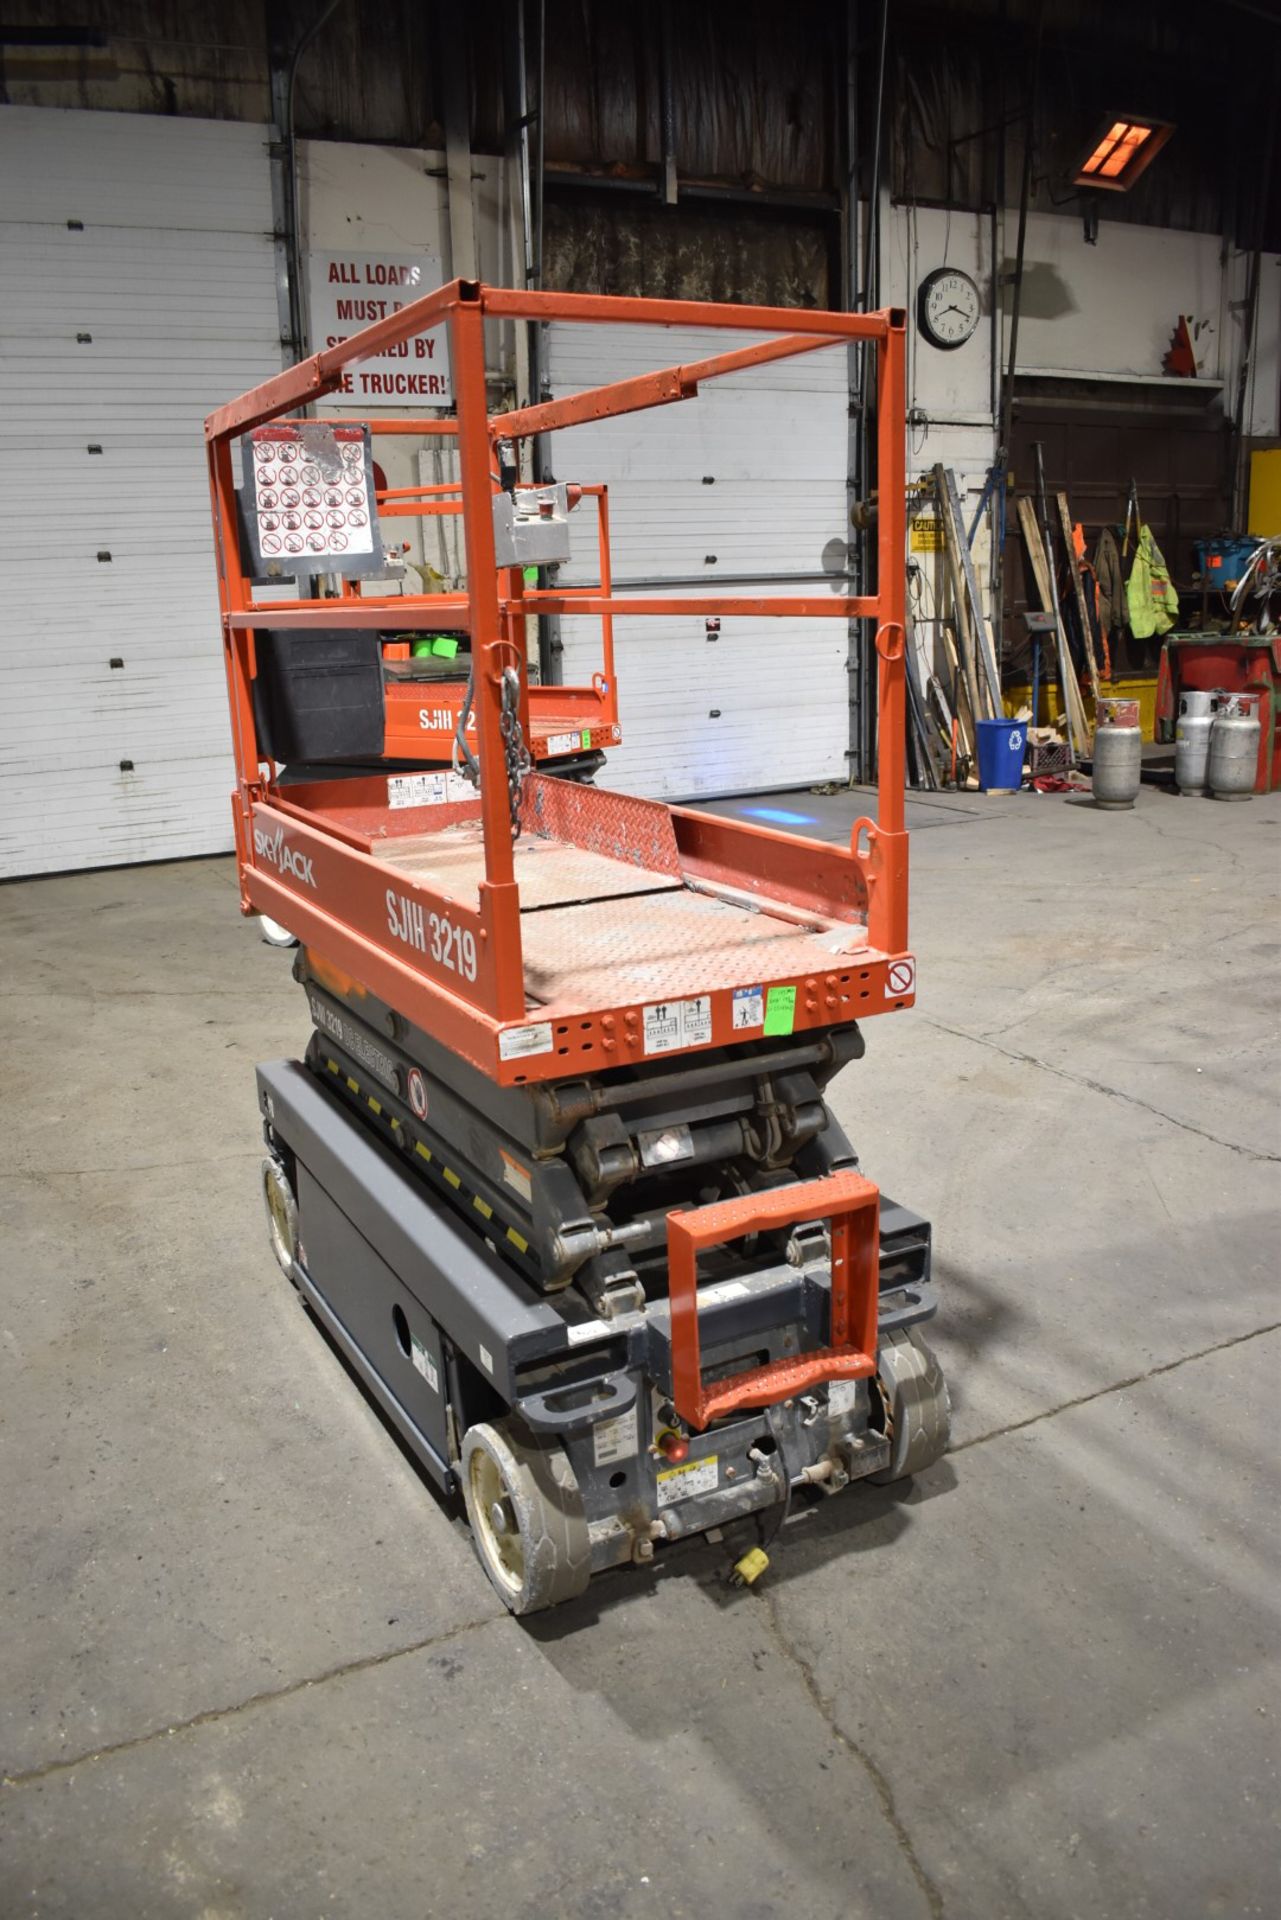 SKYJACK (2013) III 3219 ELECTRIC SCISSOR LIFT WITH 24V BATTERY, 550LBS CAPACITY, 19' MAX HEIGHT, - Image 6 of 8